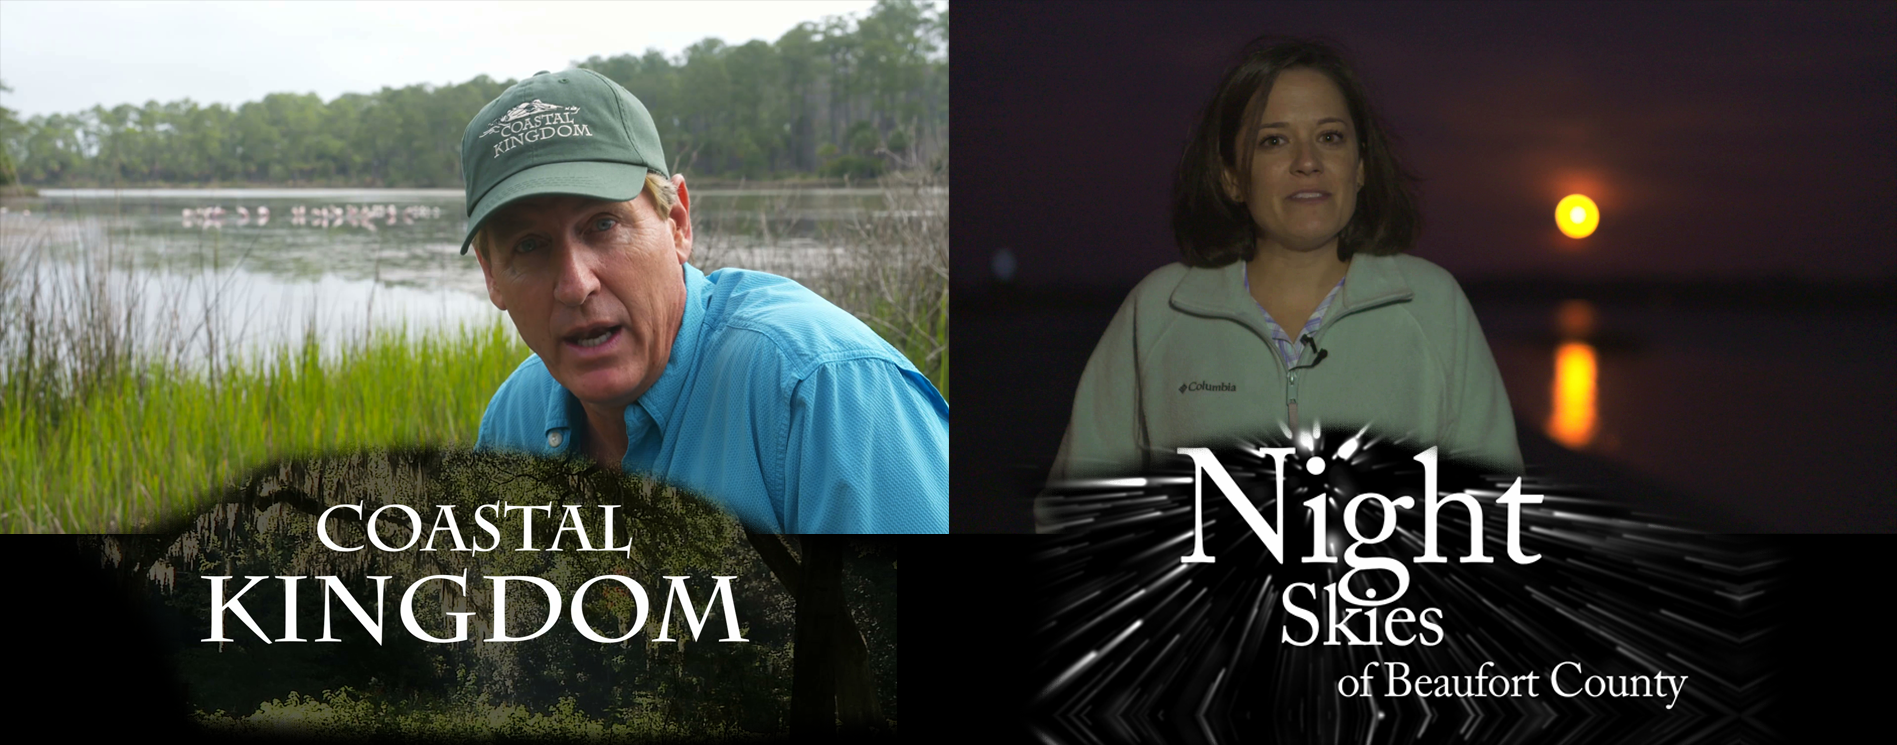 The County Channel’s EMMY-Award Winning  Series’ Night Skies and Coastal Kingdom Nominated Again This Year